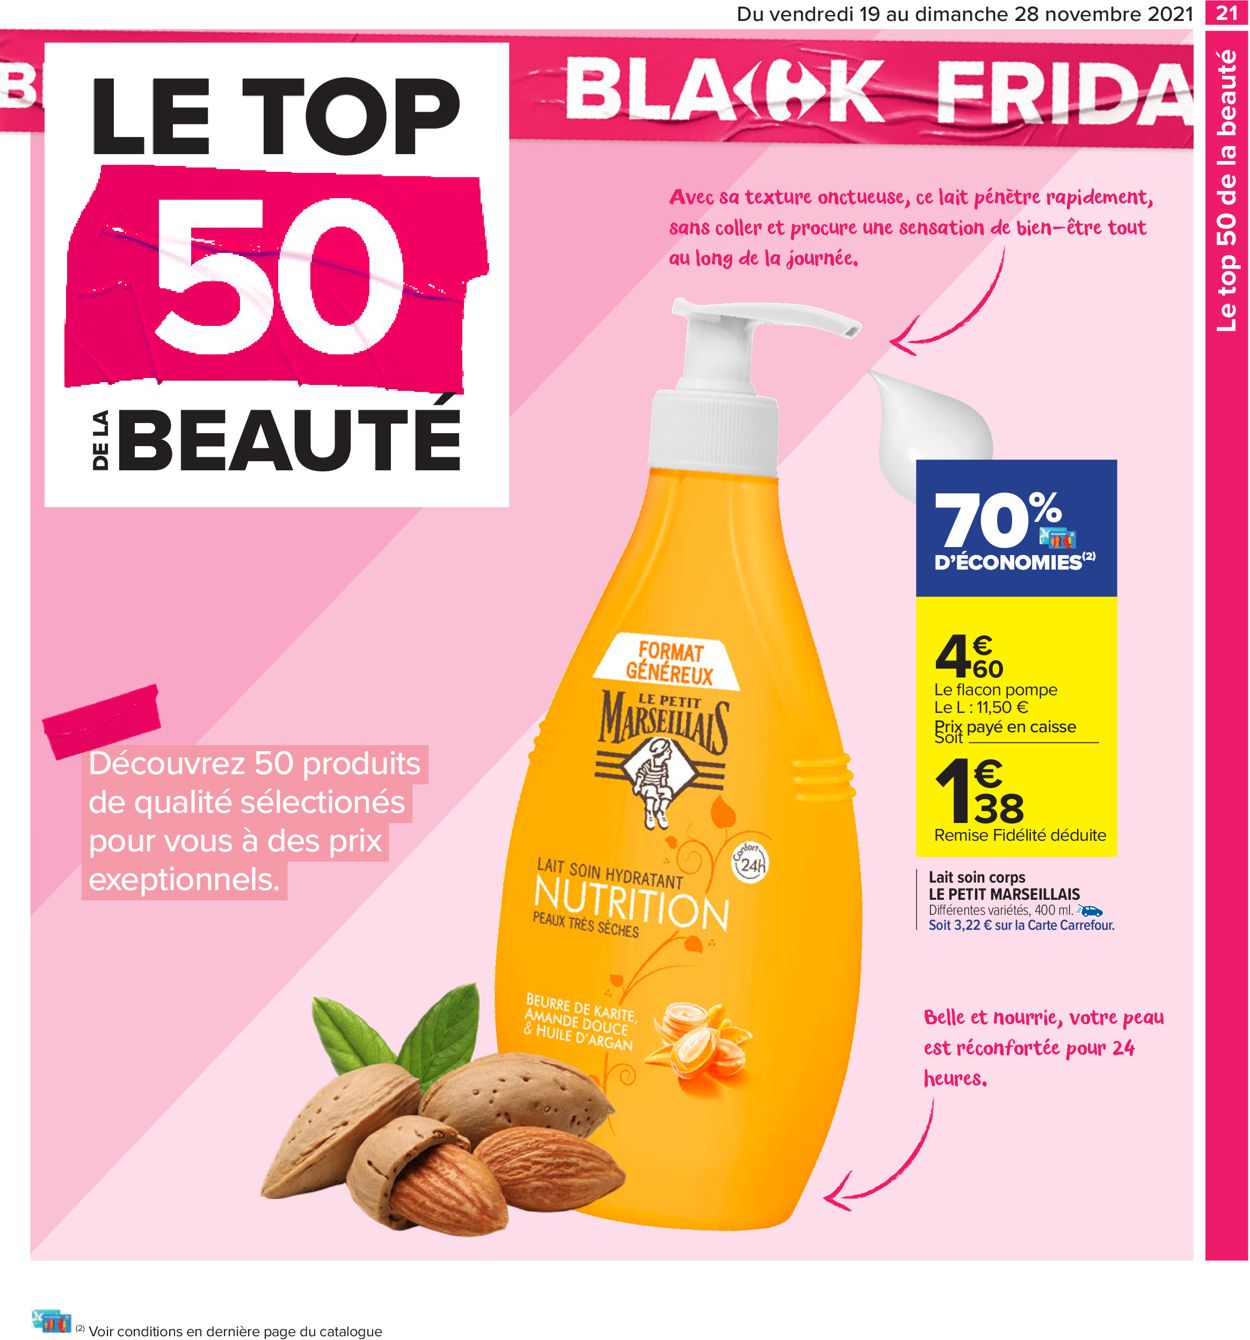 Carrefour BLACK WEEK 2021 Catalogue - 19.11-28.11.2021 (Page 21)